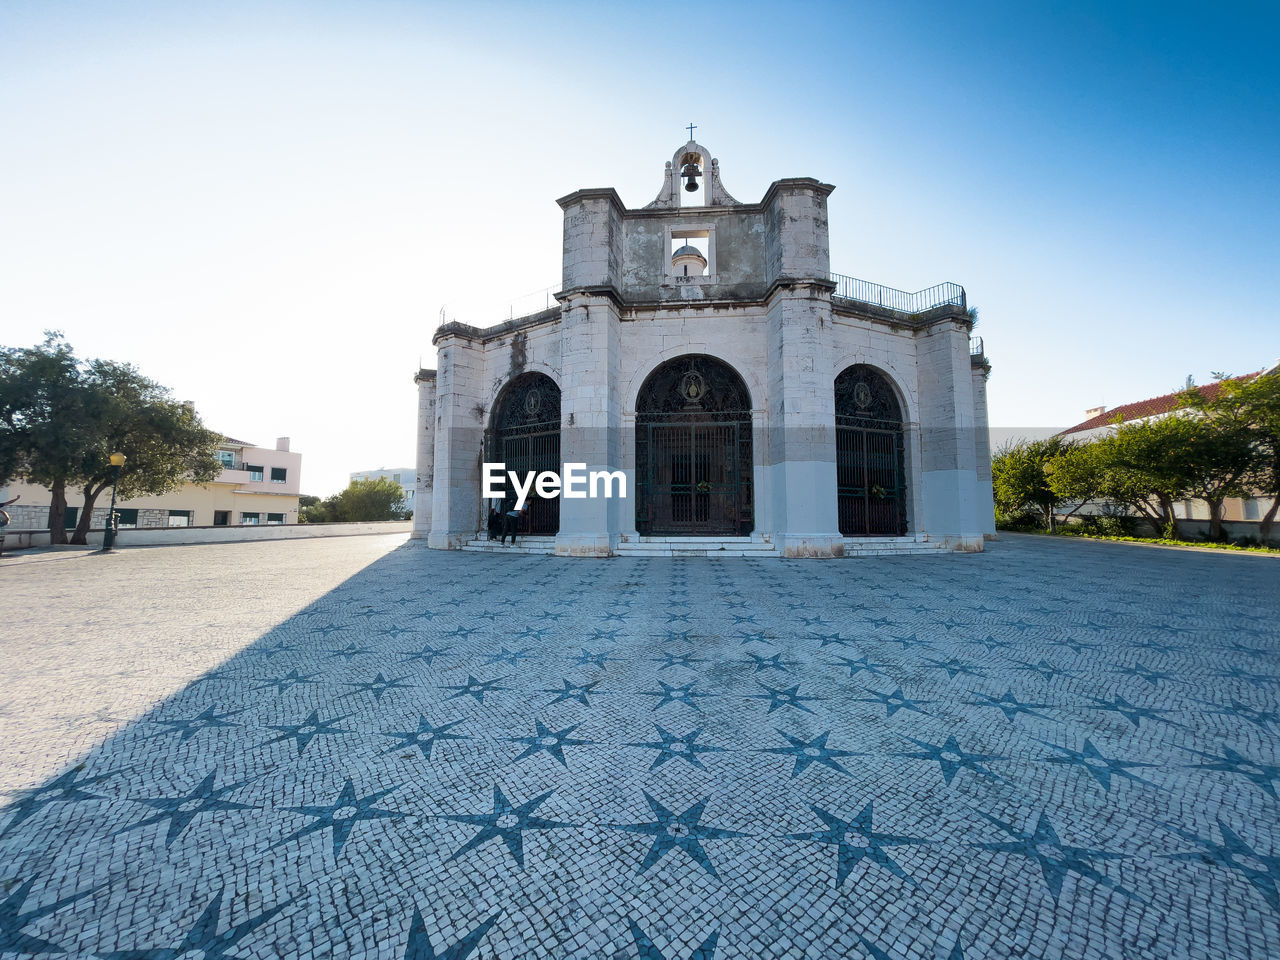 Octagonal backlit church casts long shadow on star decorated cobblestone square in lisbon